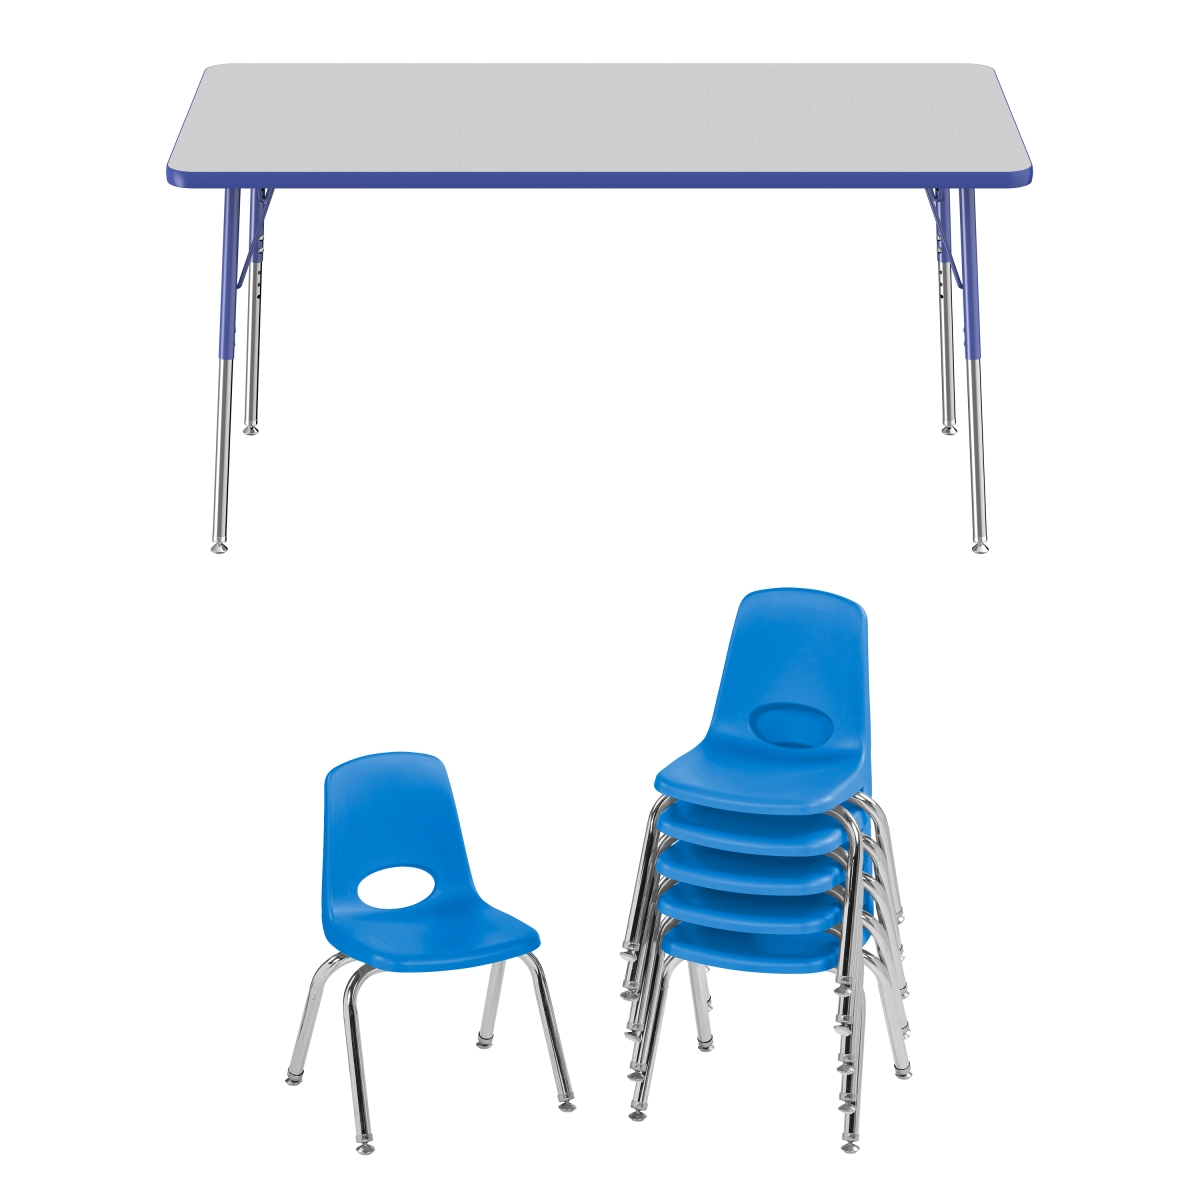 10303-gybl 30 X 60 In. Rectangle T-mold Adjustable Activity Table Standard Swivel With 6 Stack Chairs 12 In. Swivel Glide - Grey & Blue